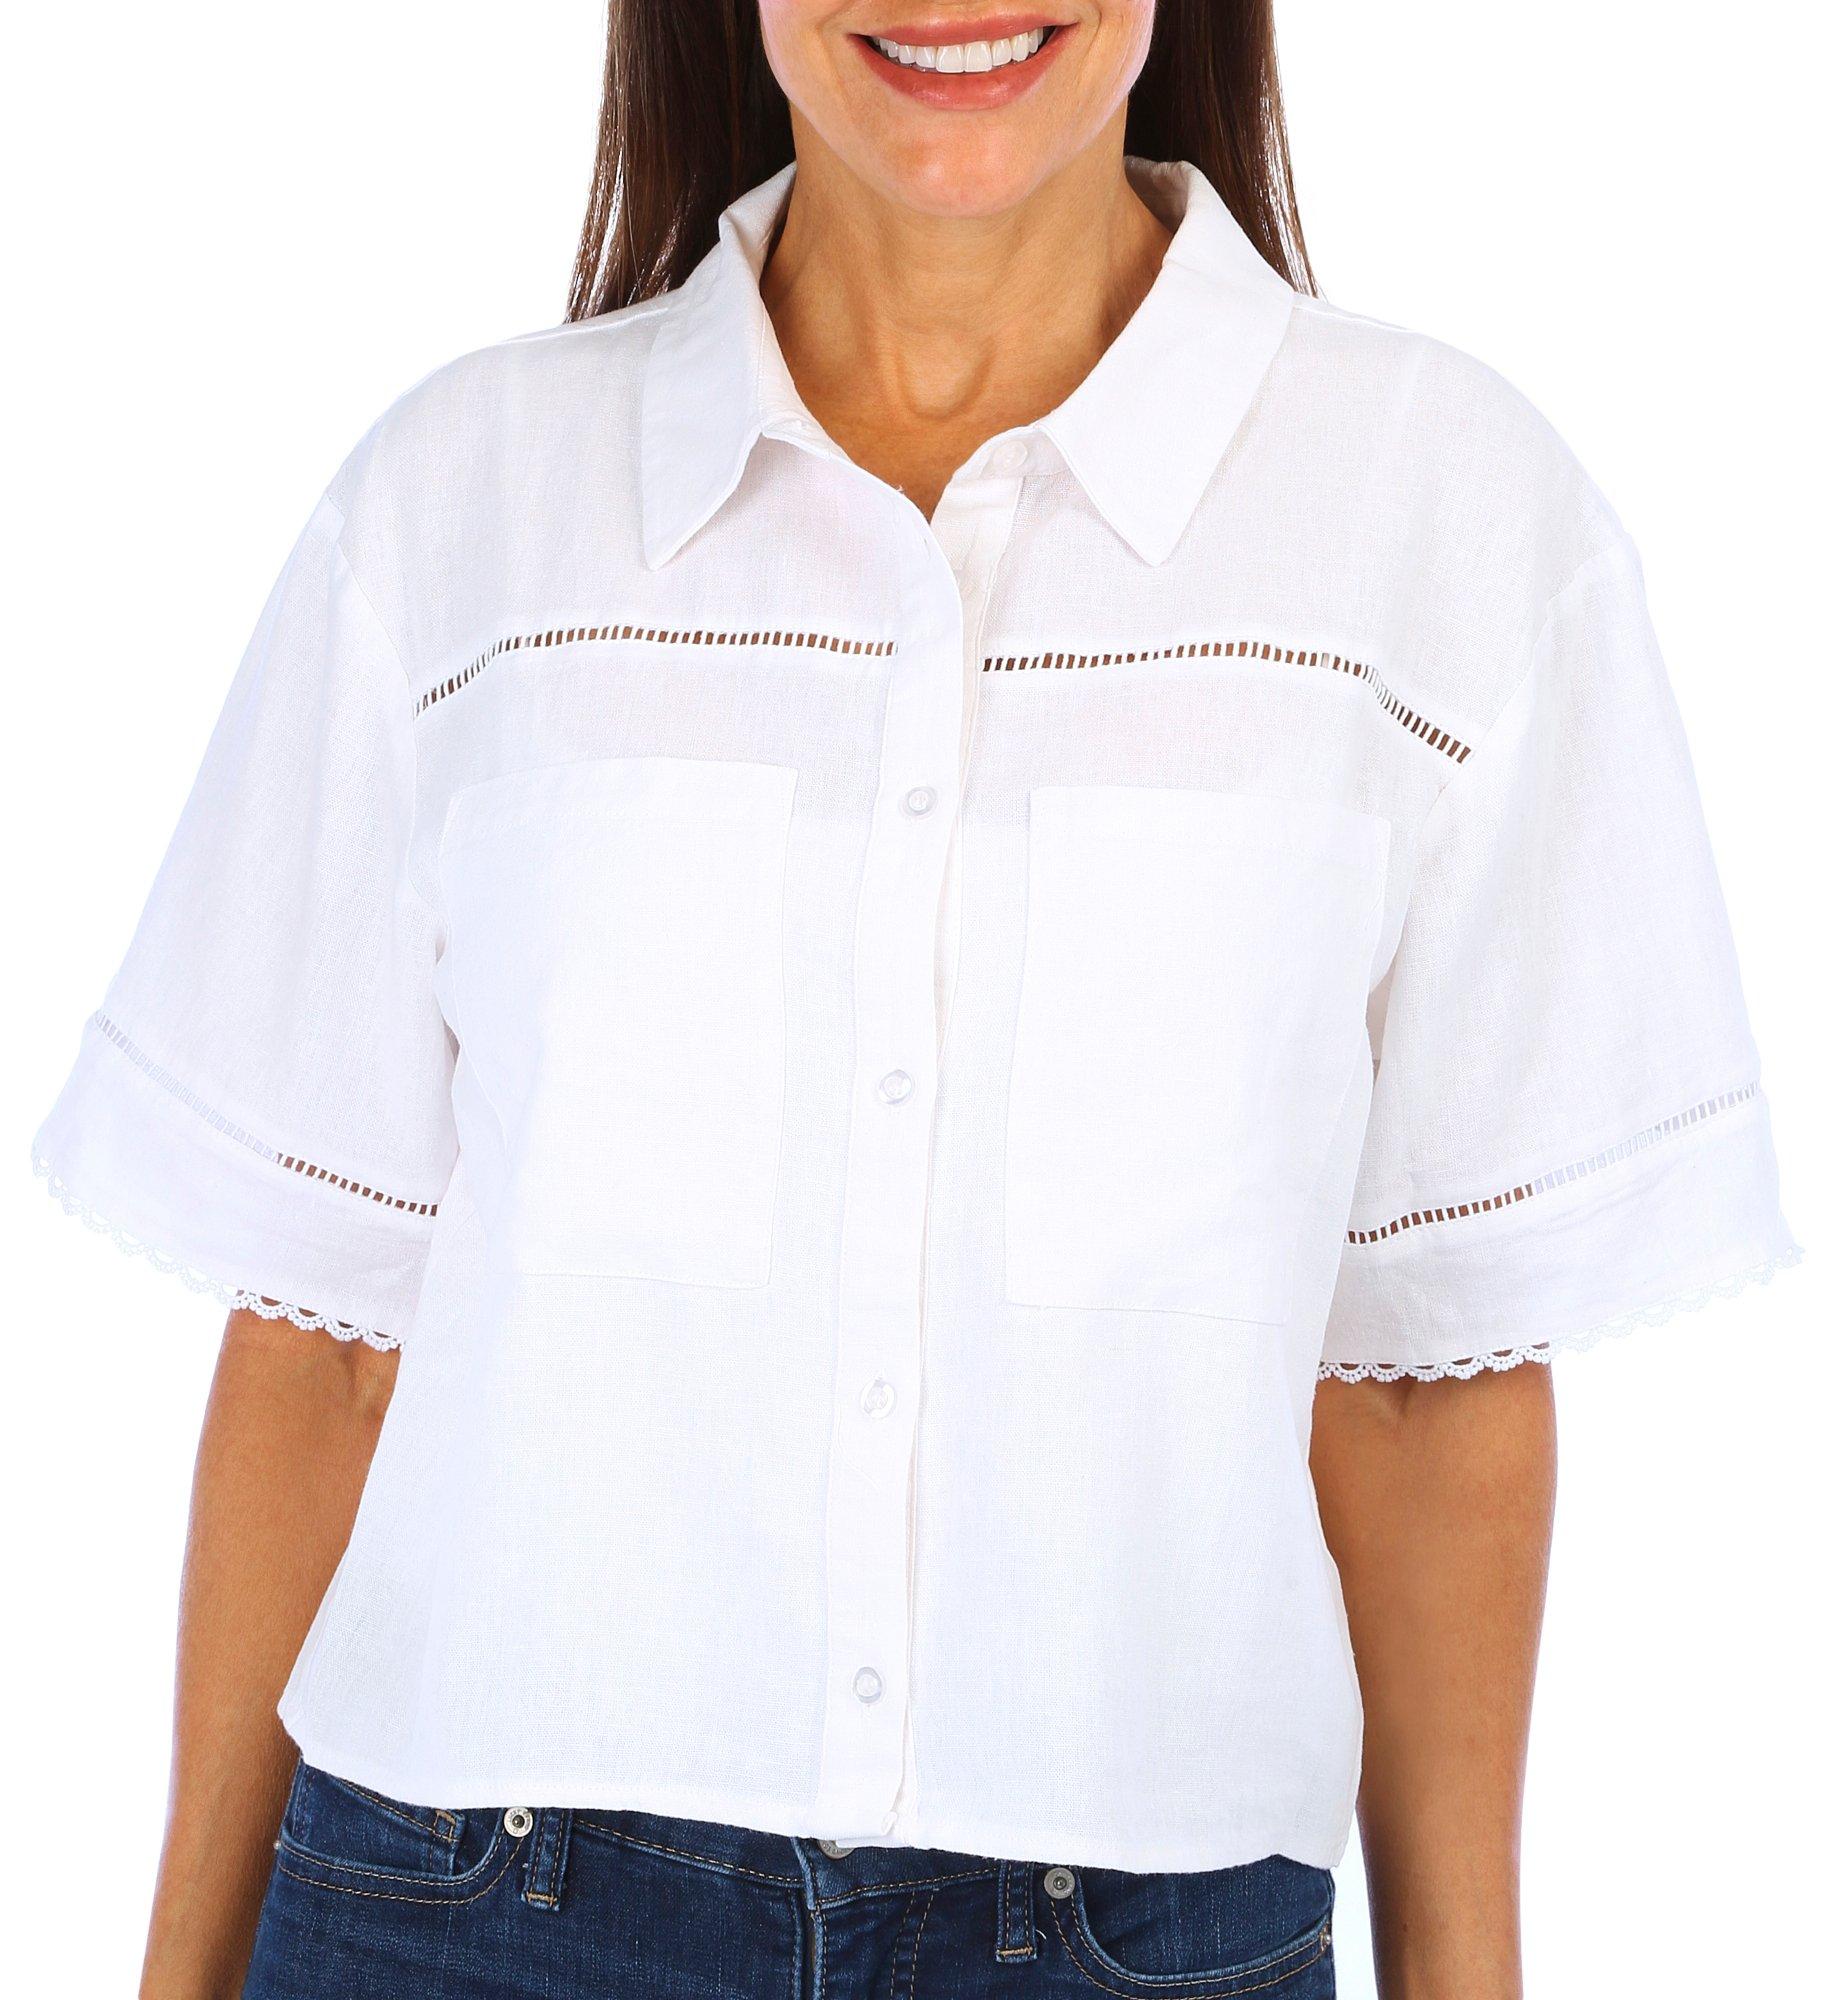 Womens Solid Collared Shirt